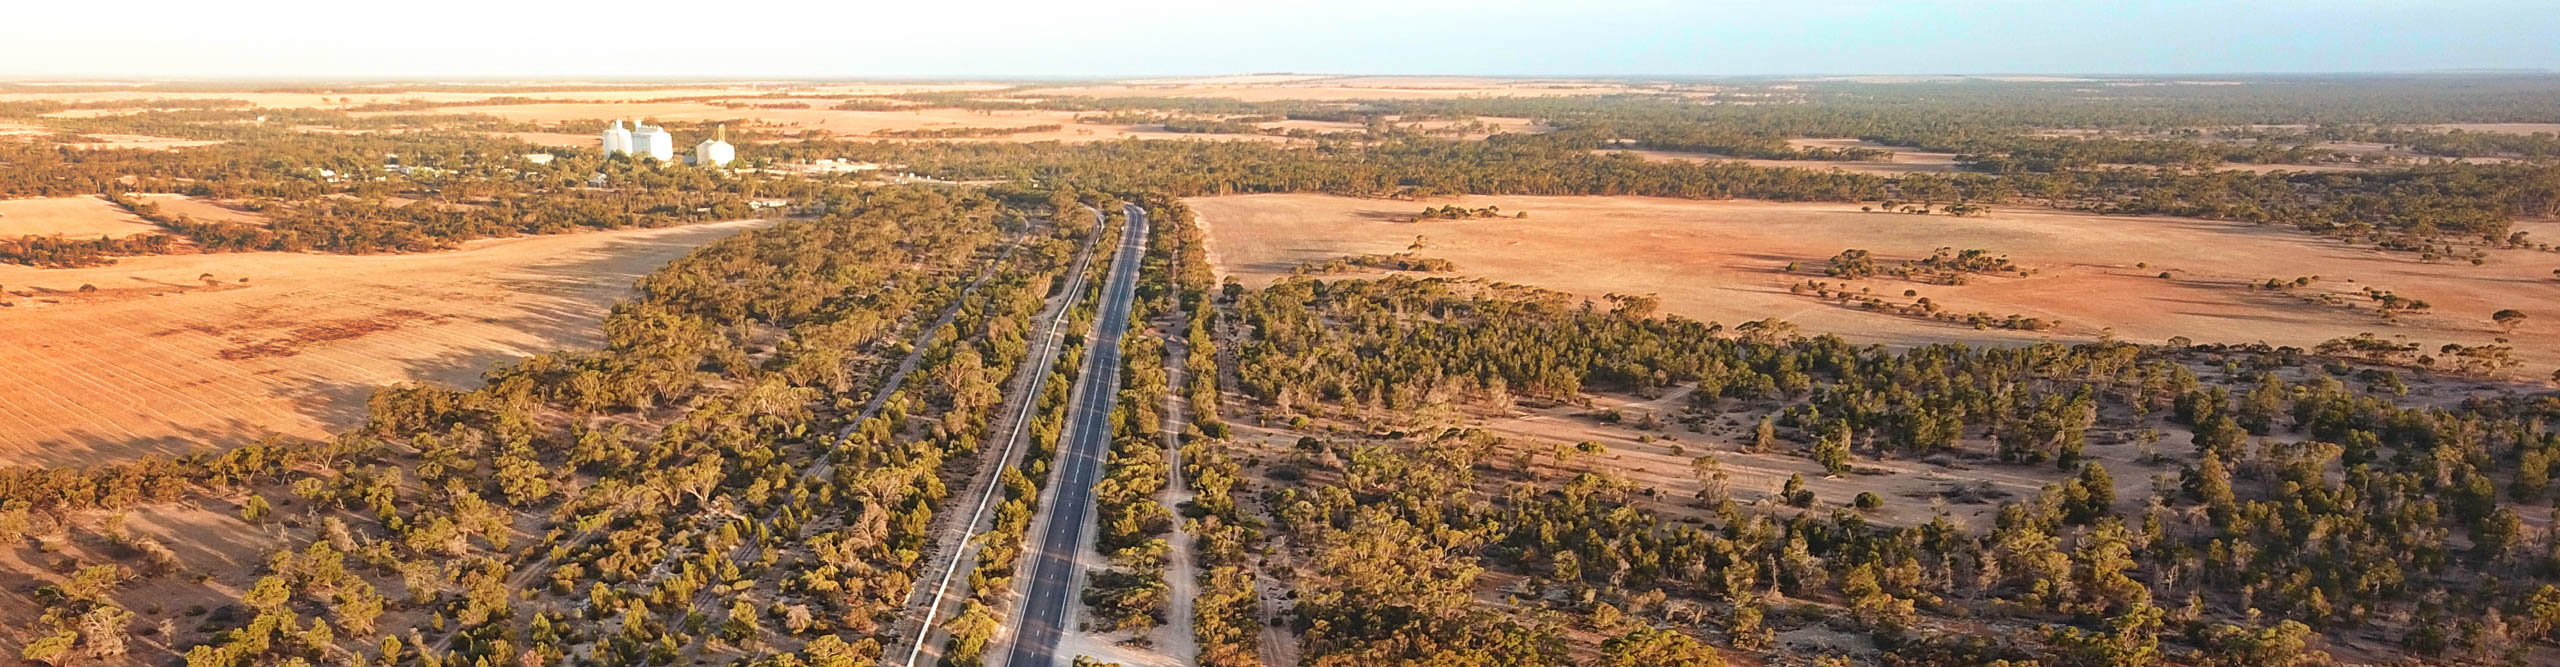 Road on the Eyre Peninsula in the late afternoon sun, South Australia 